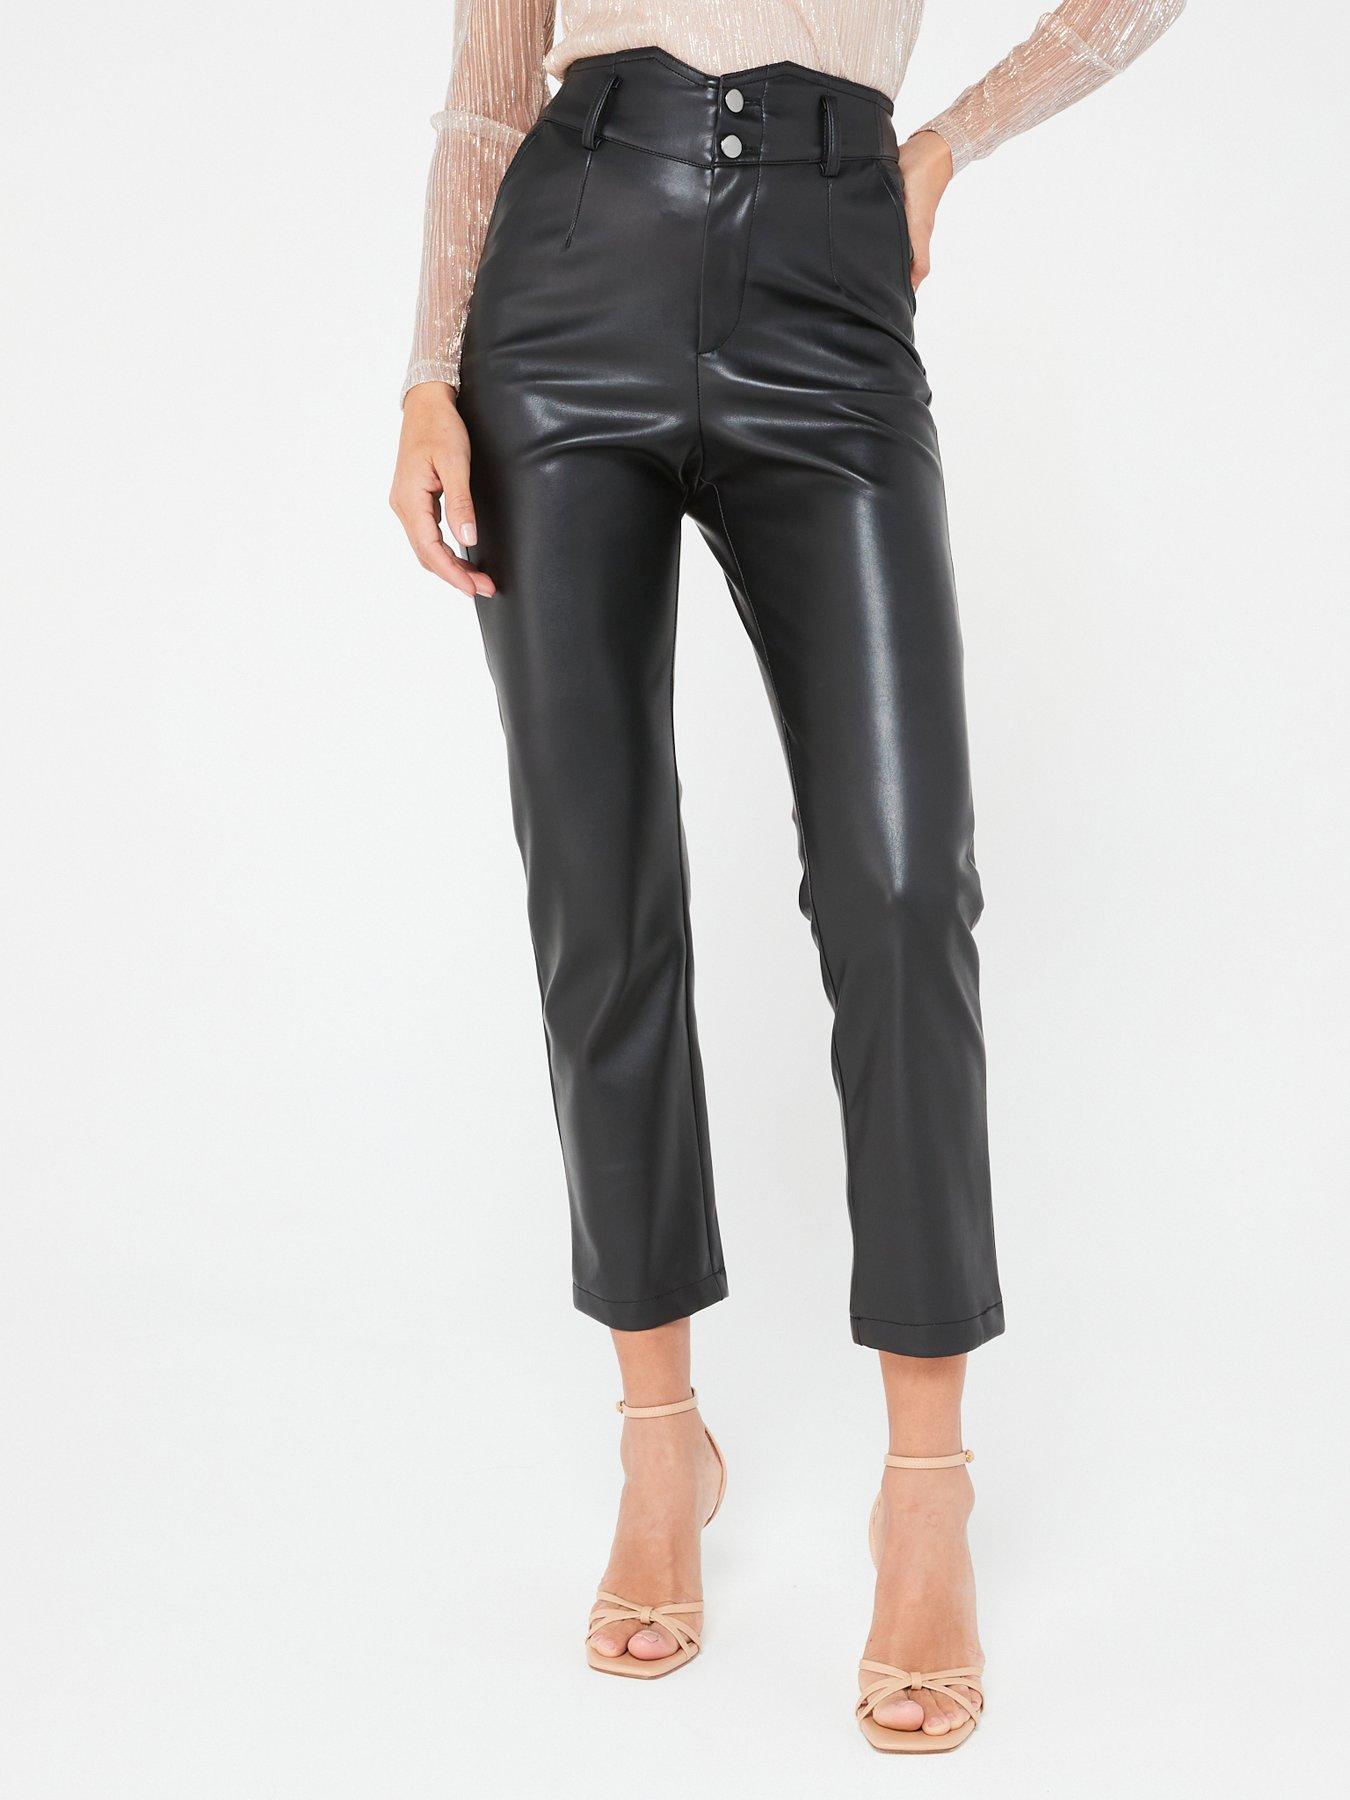 How To Style Leather Pants for Work, Play or Party — The Wardrobe Consultant